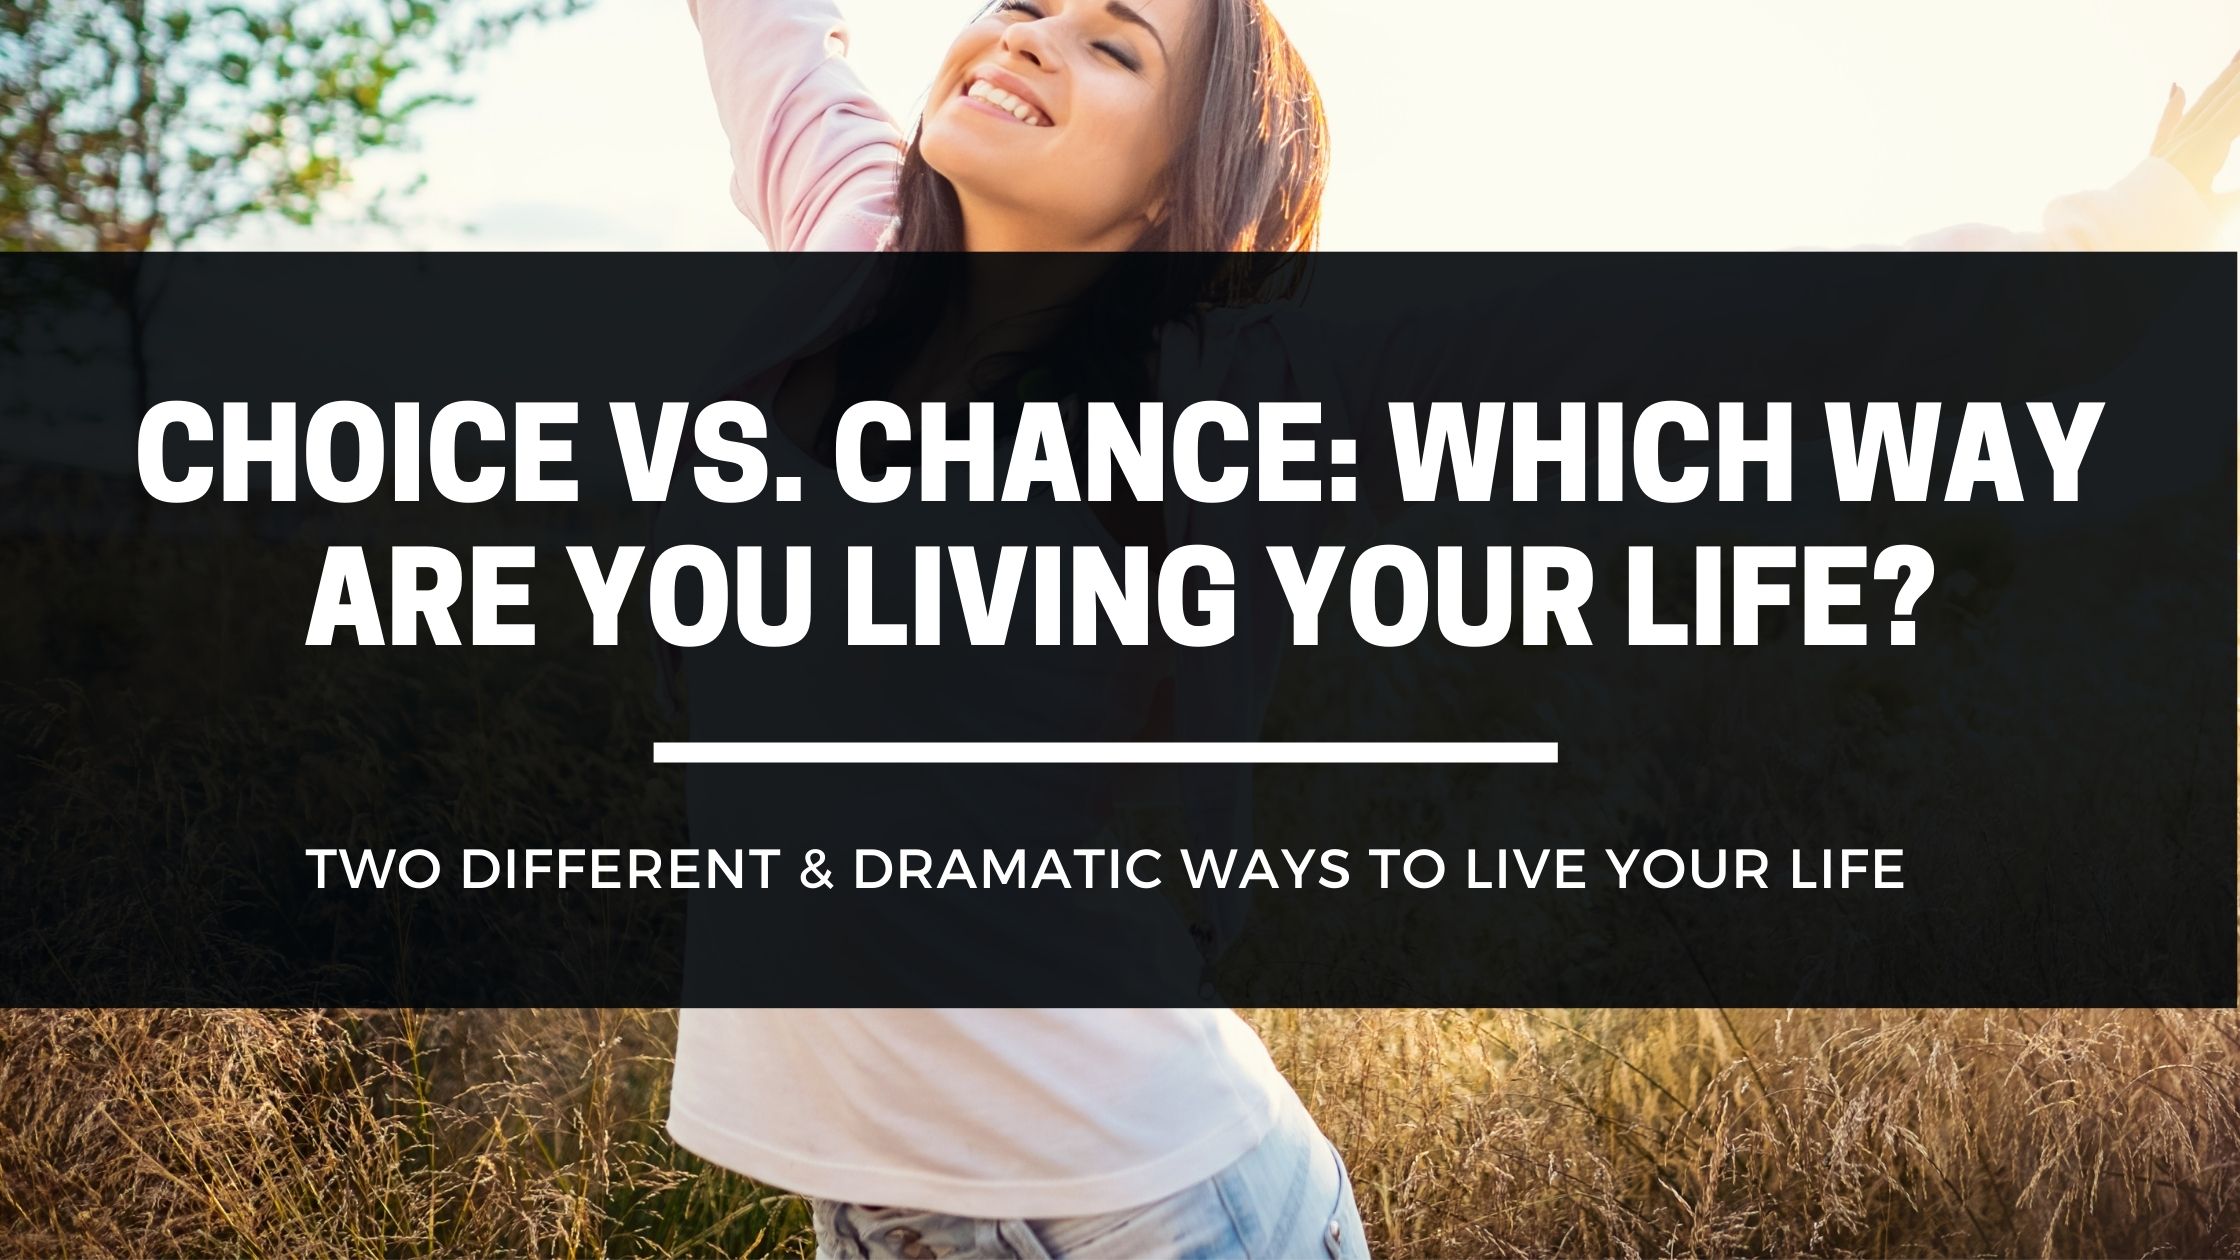 Choice vs Chance - Which Way Are You Living Your Life?